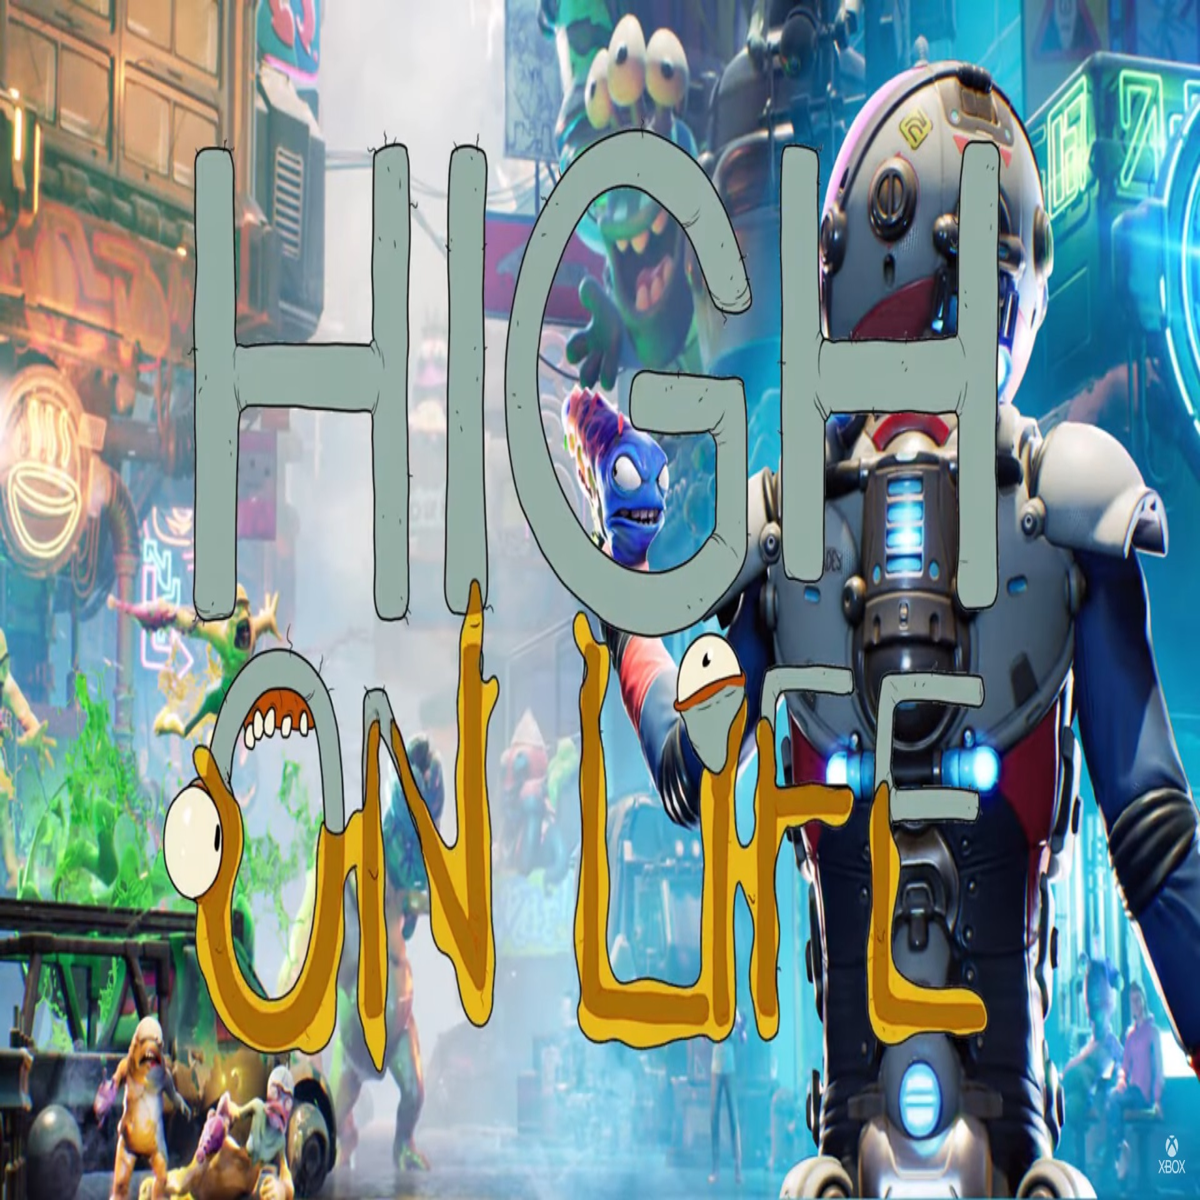 High On Life - What We Know So Far